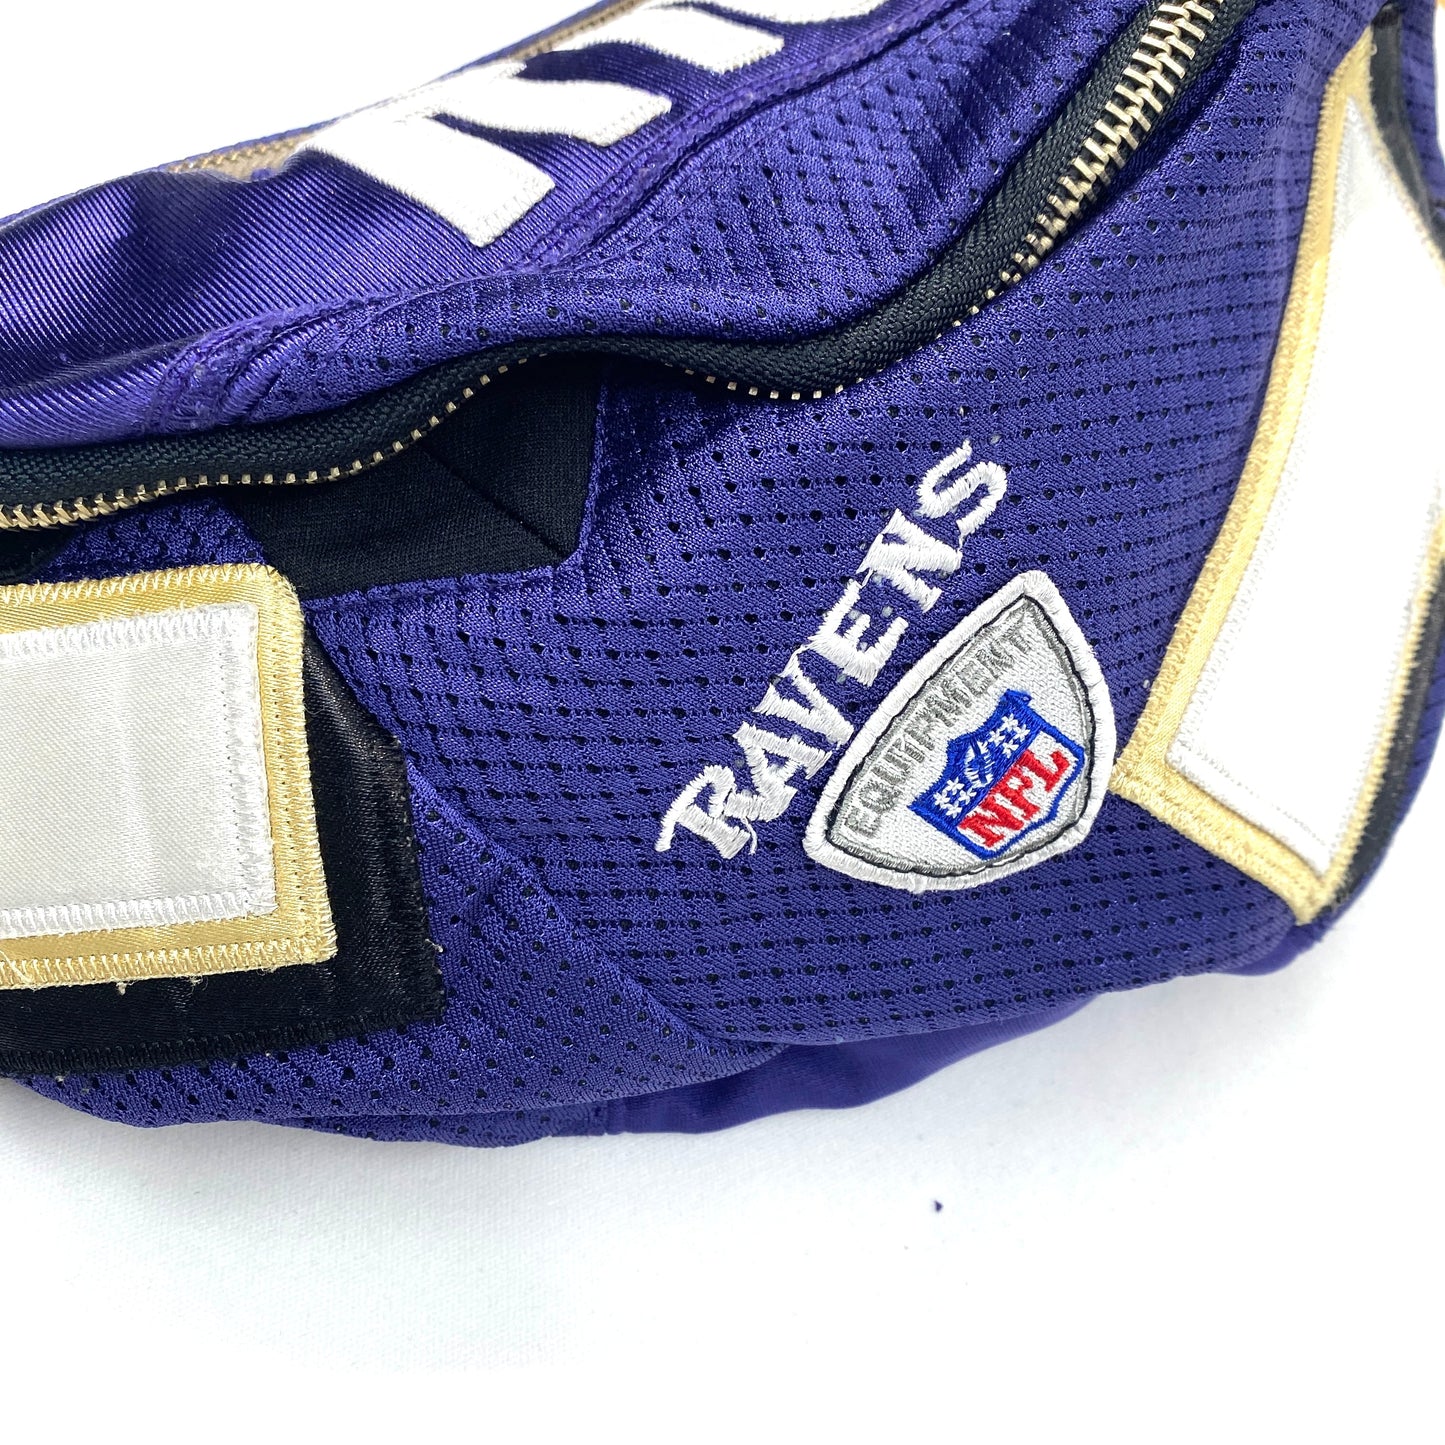 NFL Team Ravens "RICE" Amekaji Japanese Vintage Handmade Custom One and Only One Cote Mer Upcycle Sustainable Upscale Street Fashion Embroidered Remake Deconstructed Shirts Waist Bag